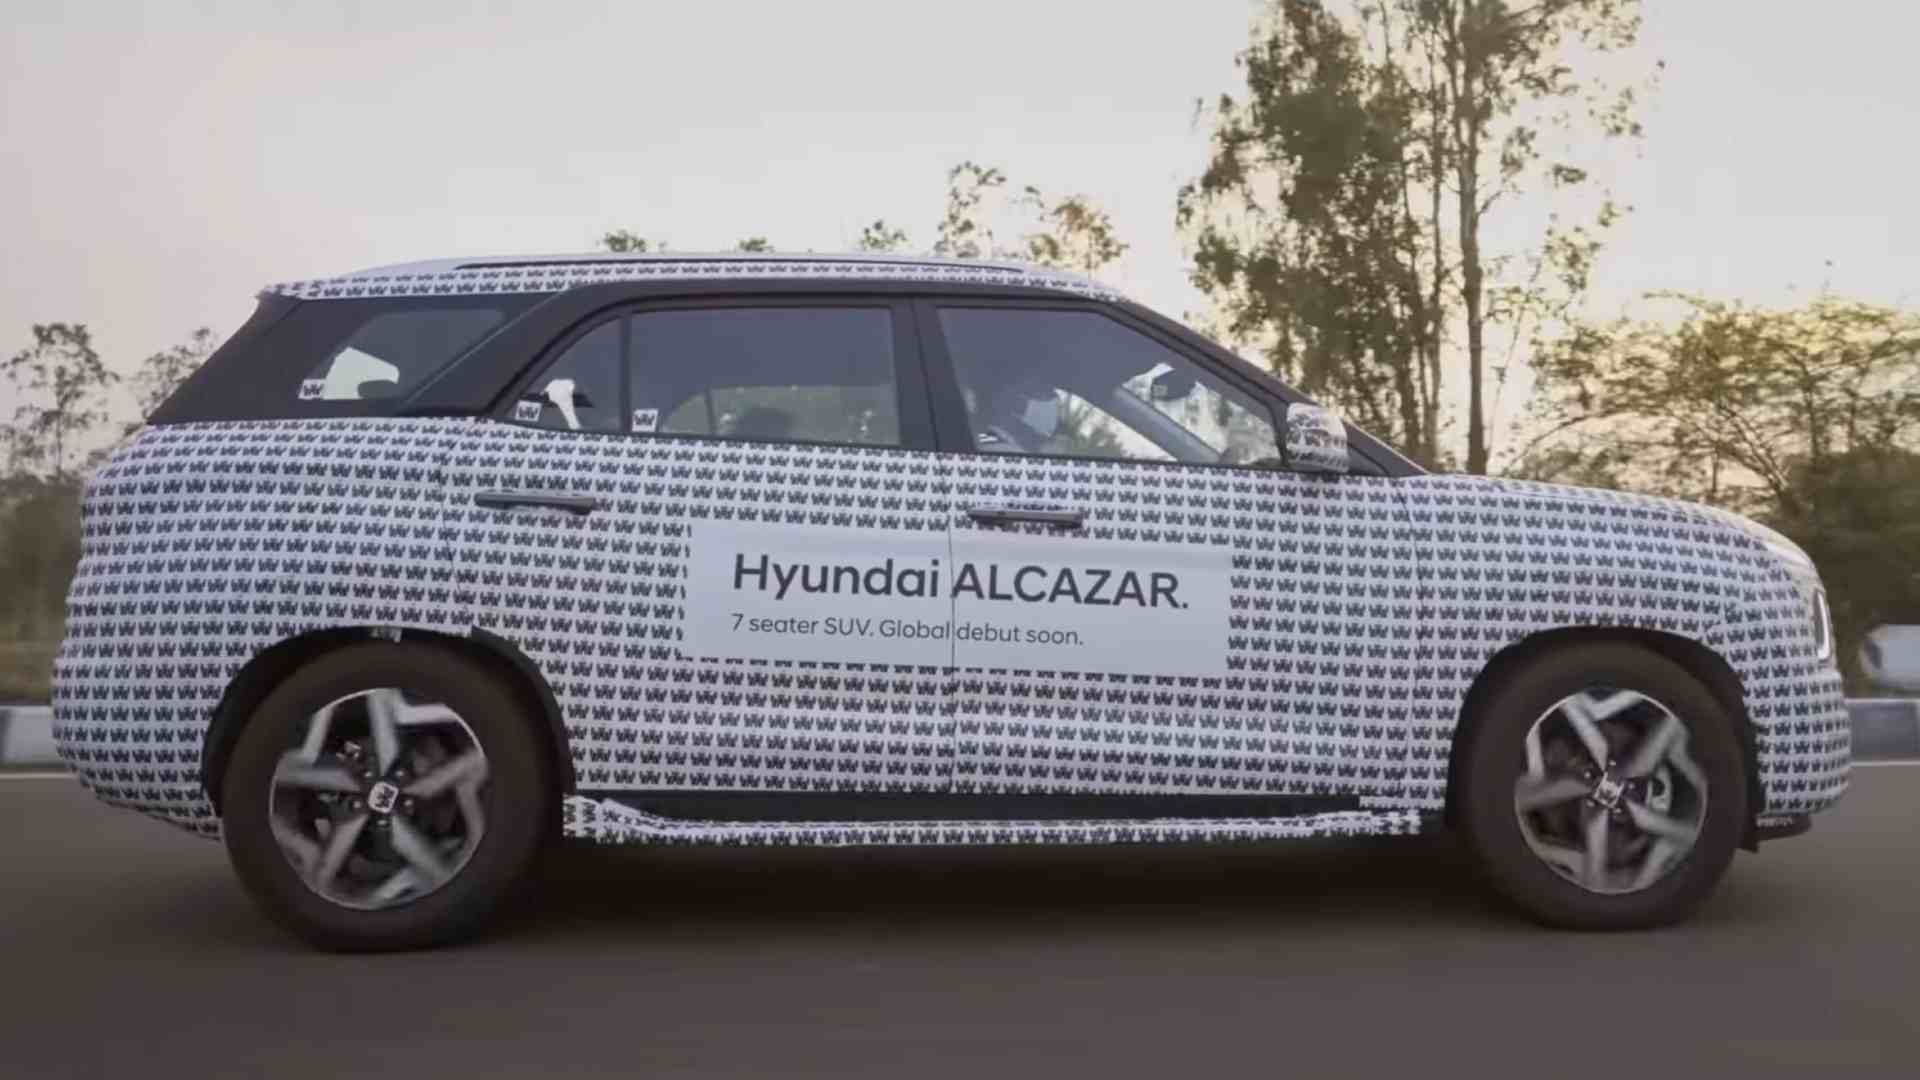 The increase in length with the Hyundai Alcazar necessitated by the addition of a third row of seats. Image: Hyundai